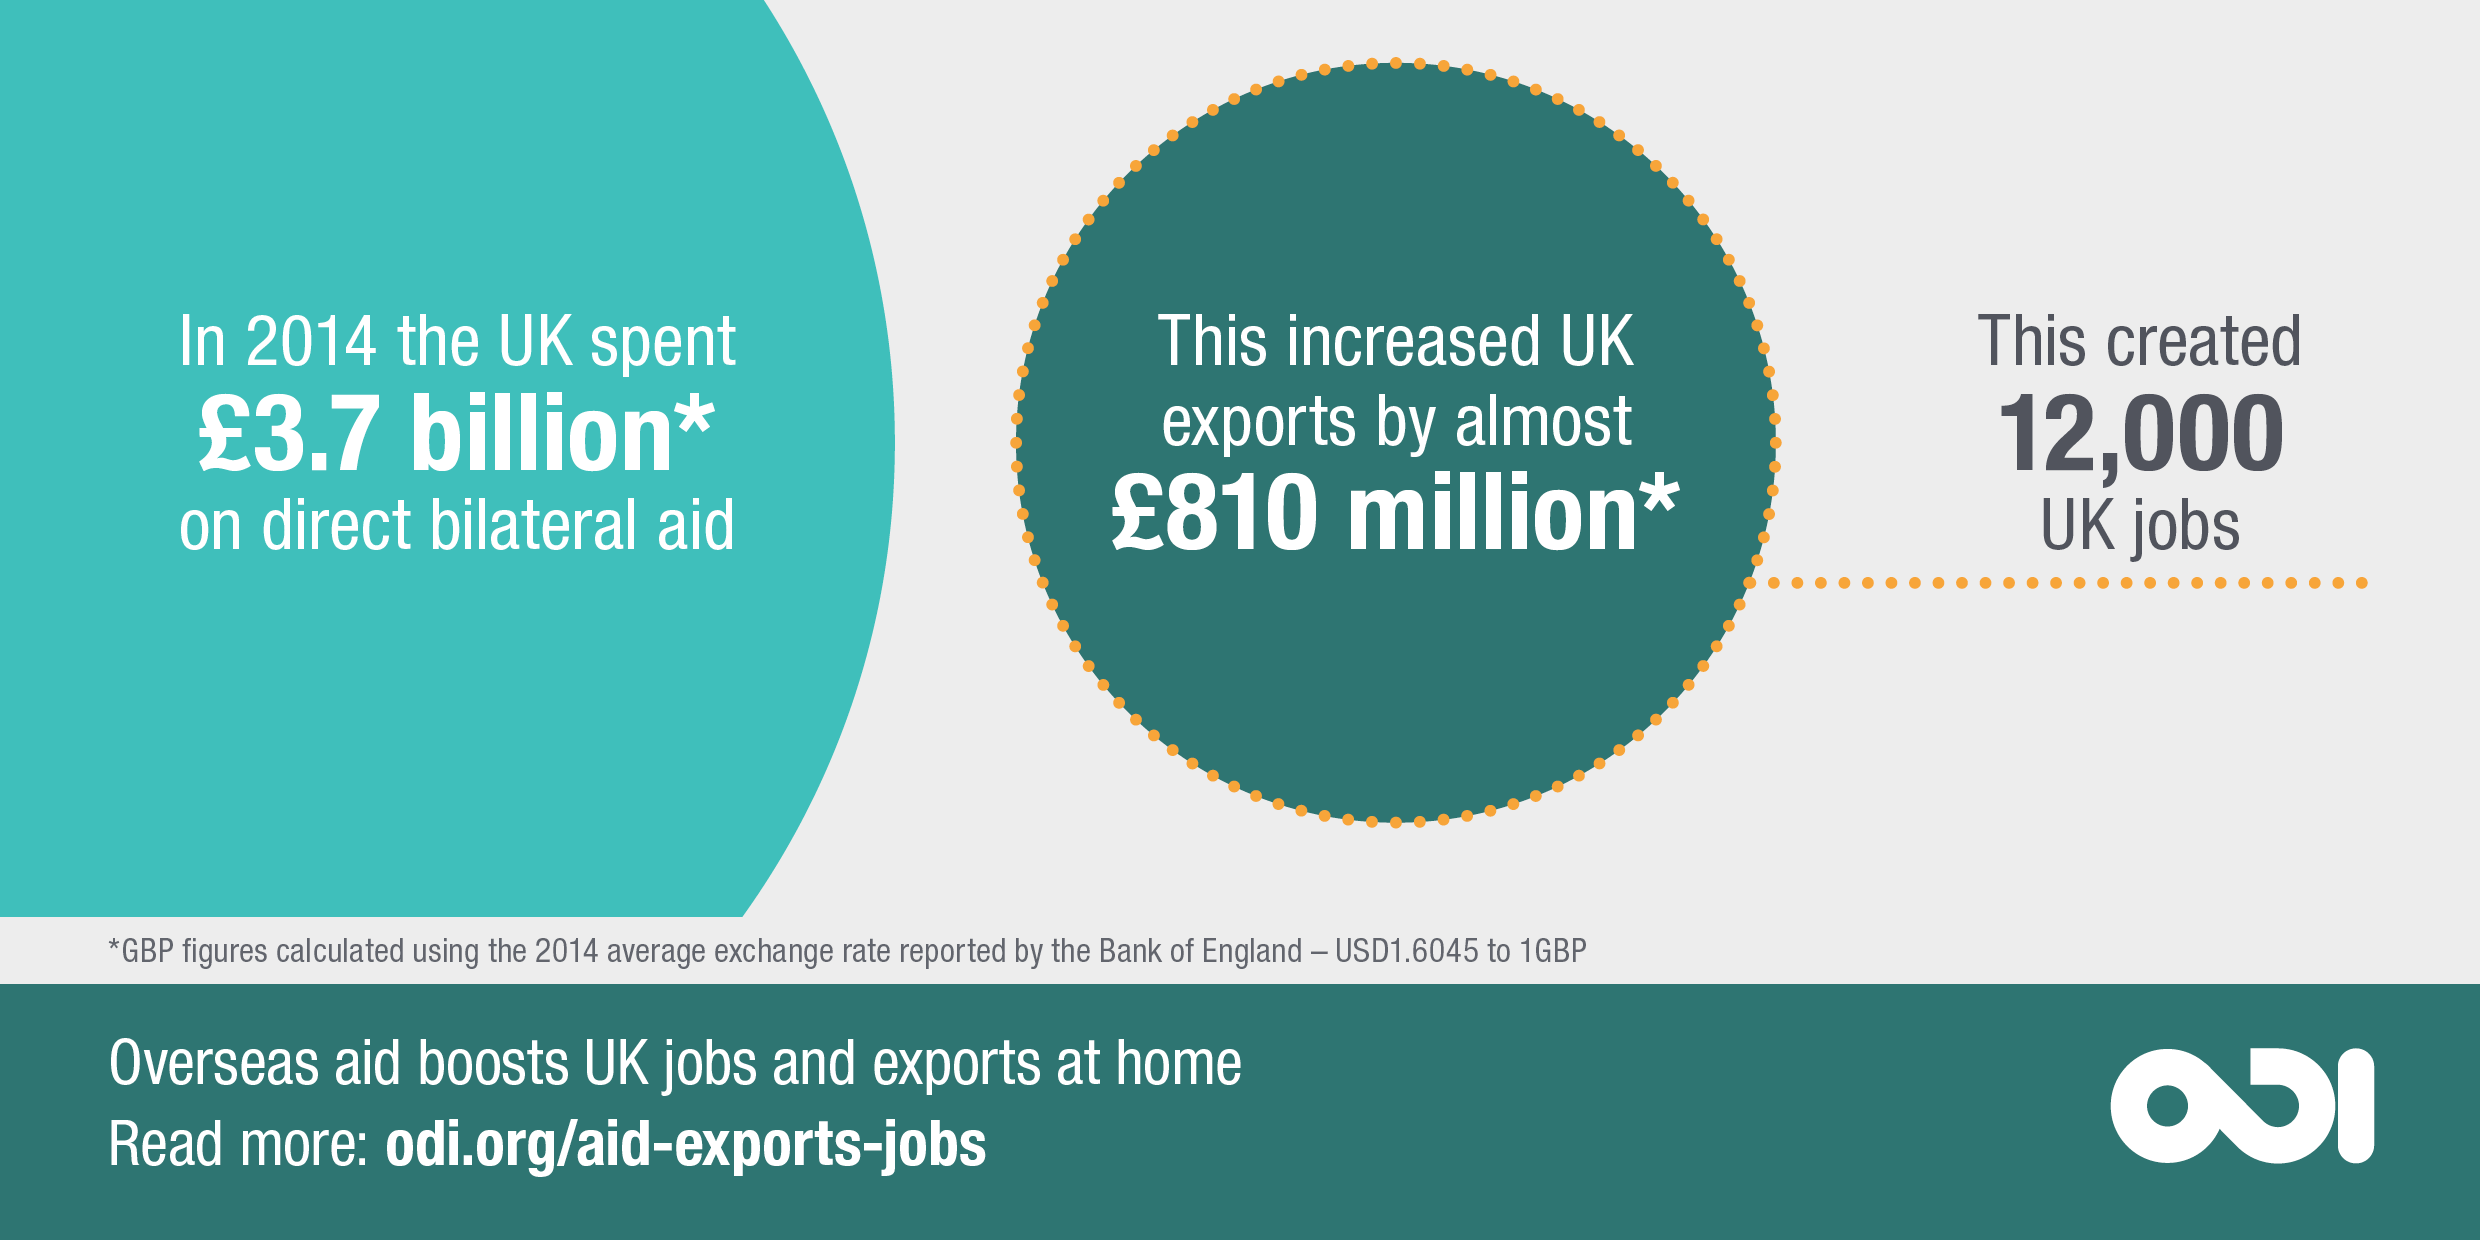 ODI graphic: Overseas aid boosts UK exports and jobs at home